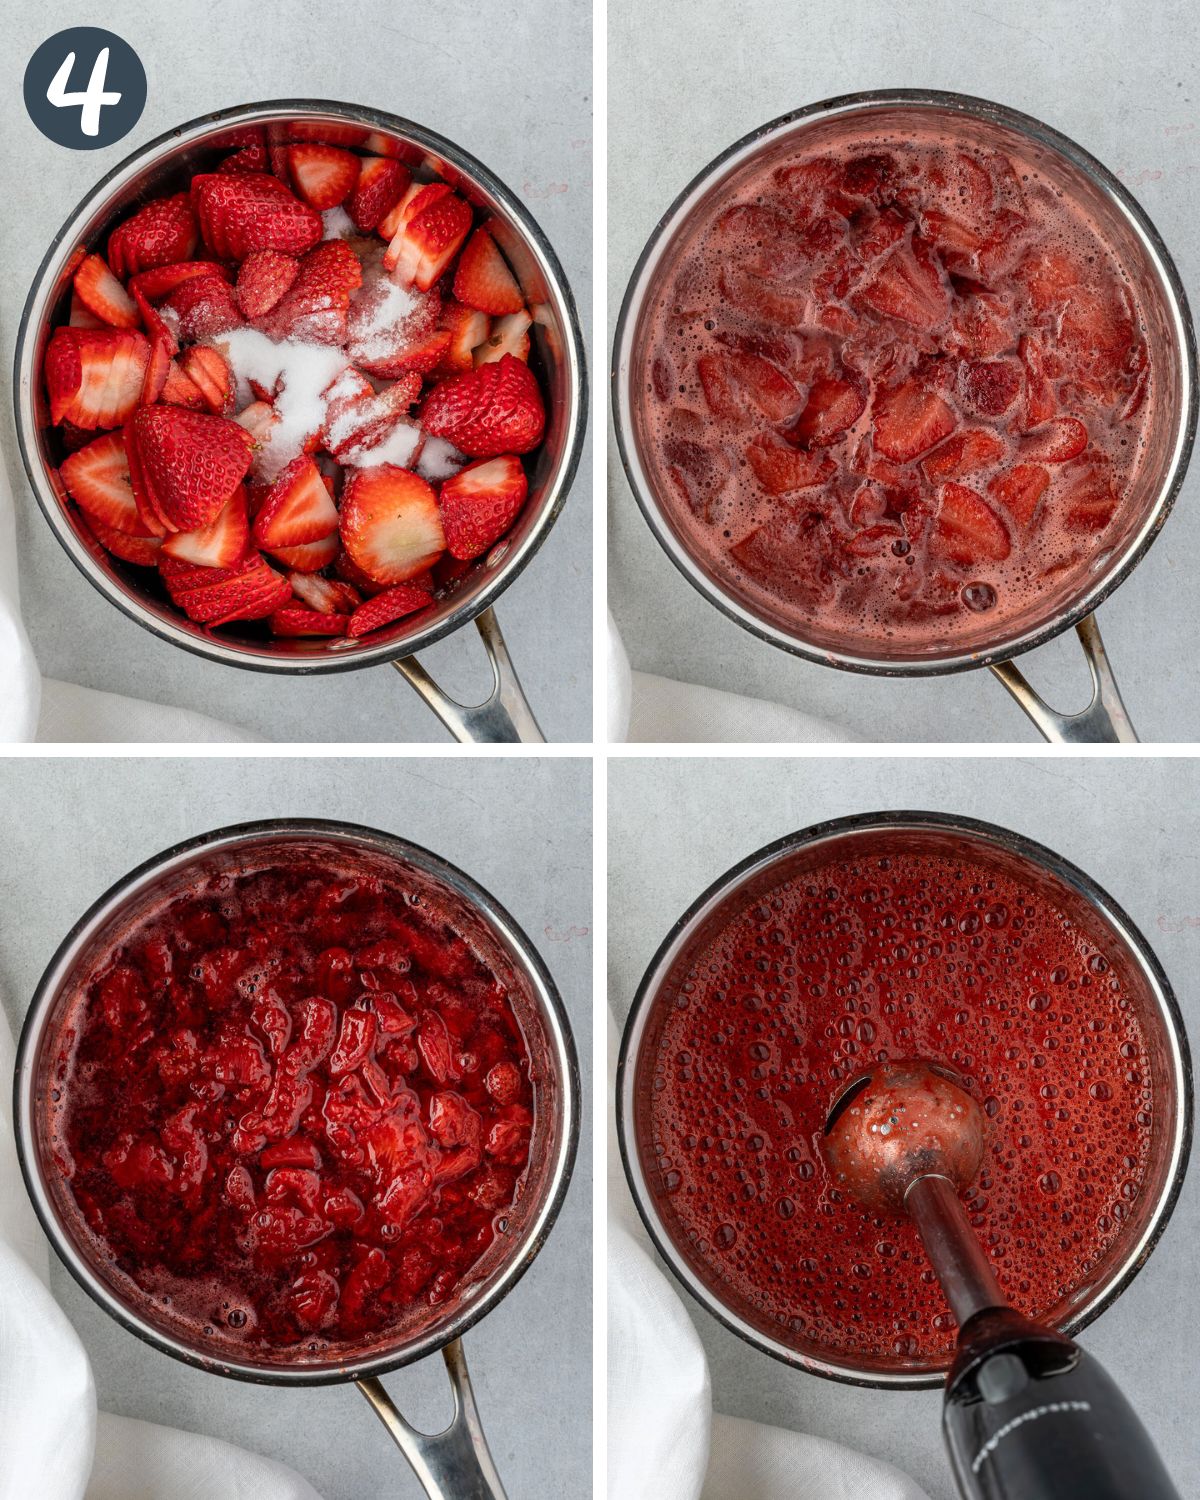 4 images showing the process of making strawberry sauce: Ingredients in pan, boiling, thickened, and blended.